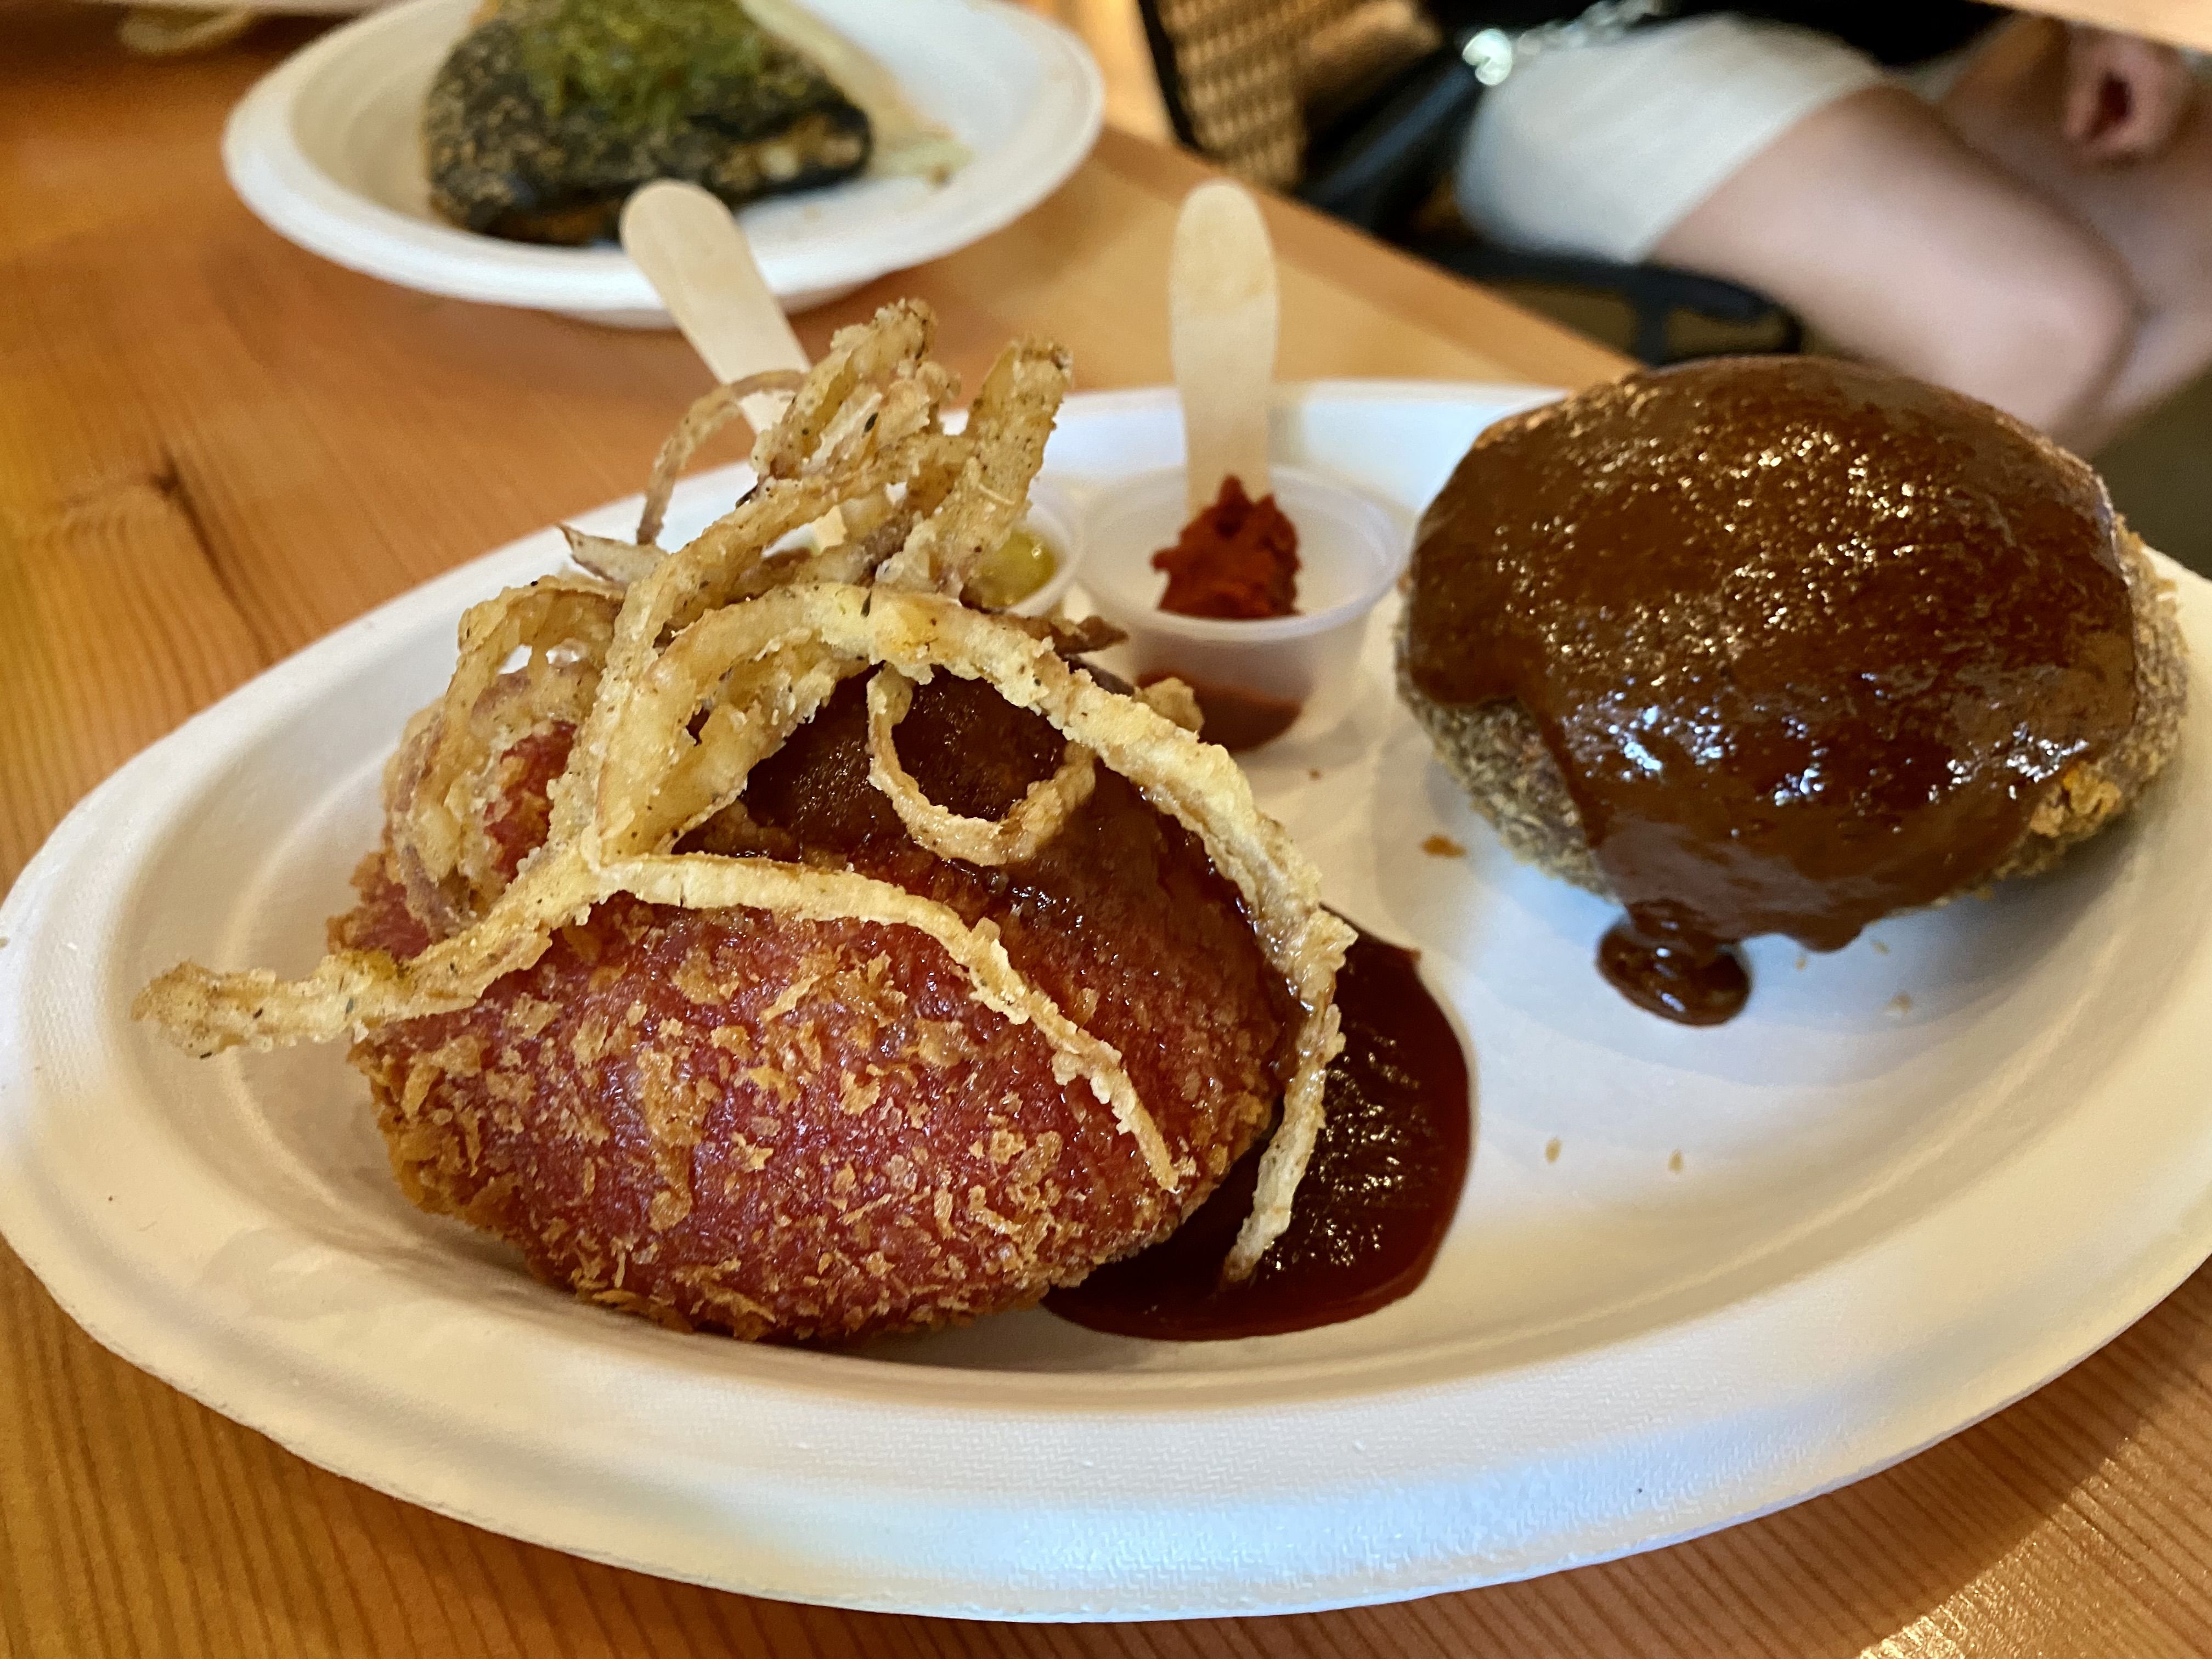 A round reddish colored bun with fried onions on top with another brown pastry behind it. 